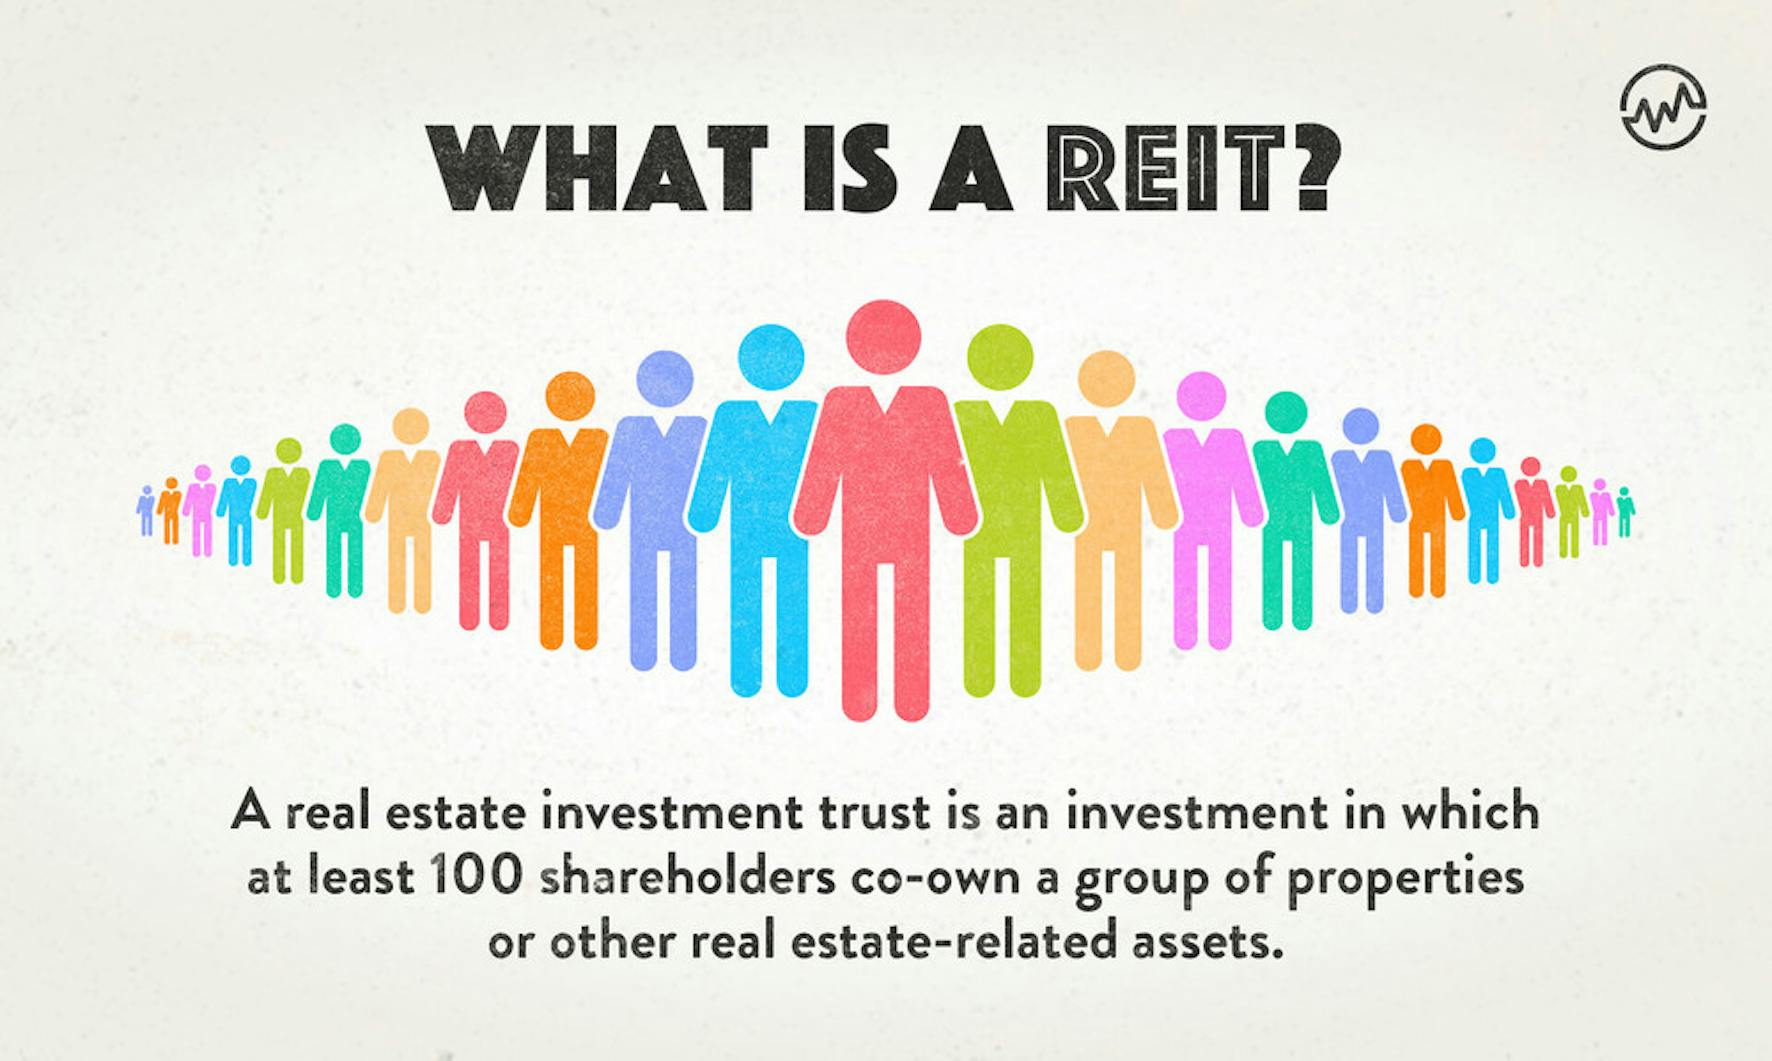 The Simple Guide To REITs How To Invest In Real Estate With Less Risk